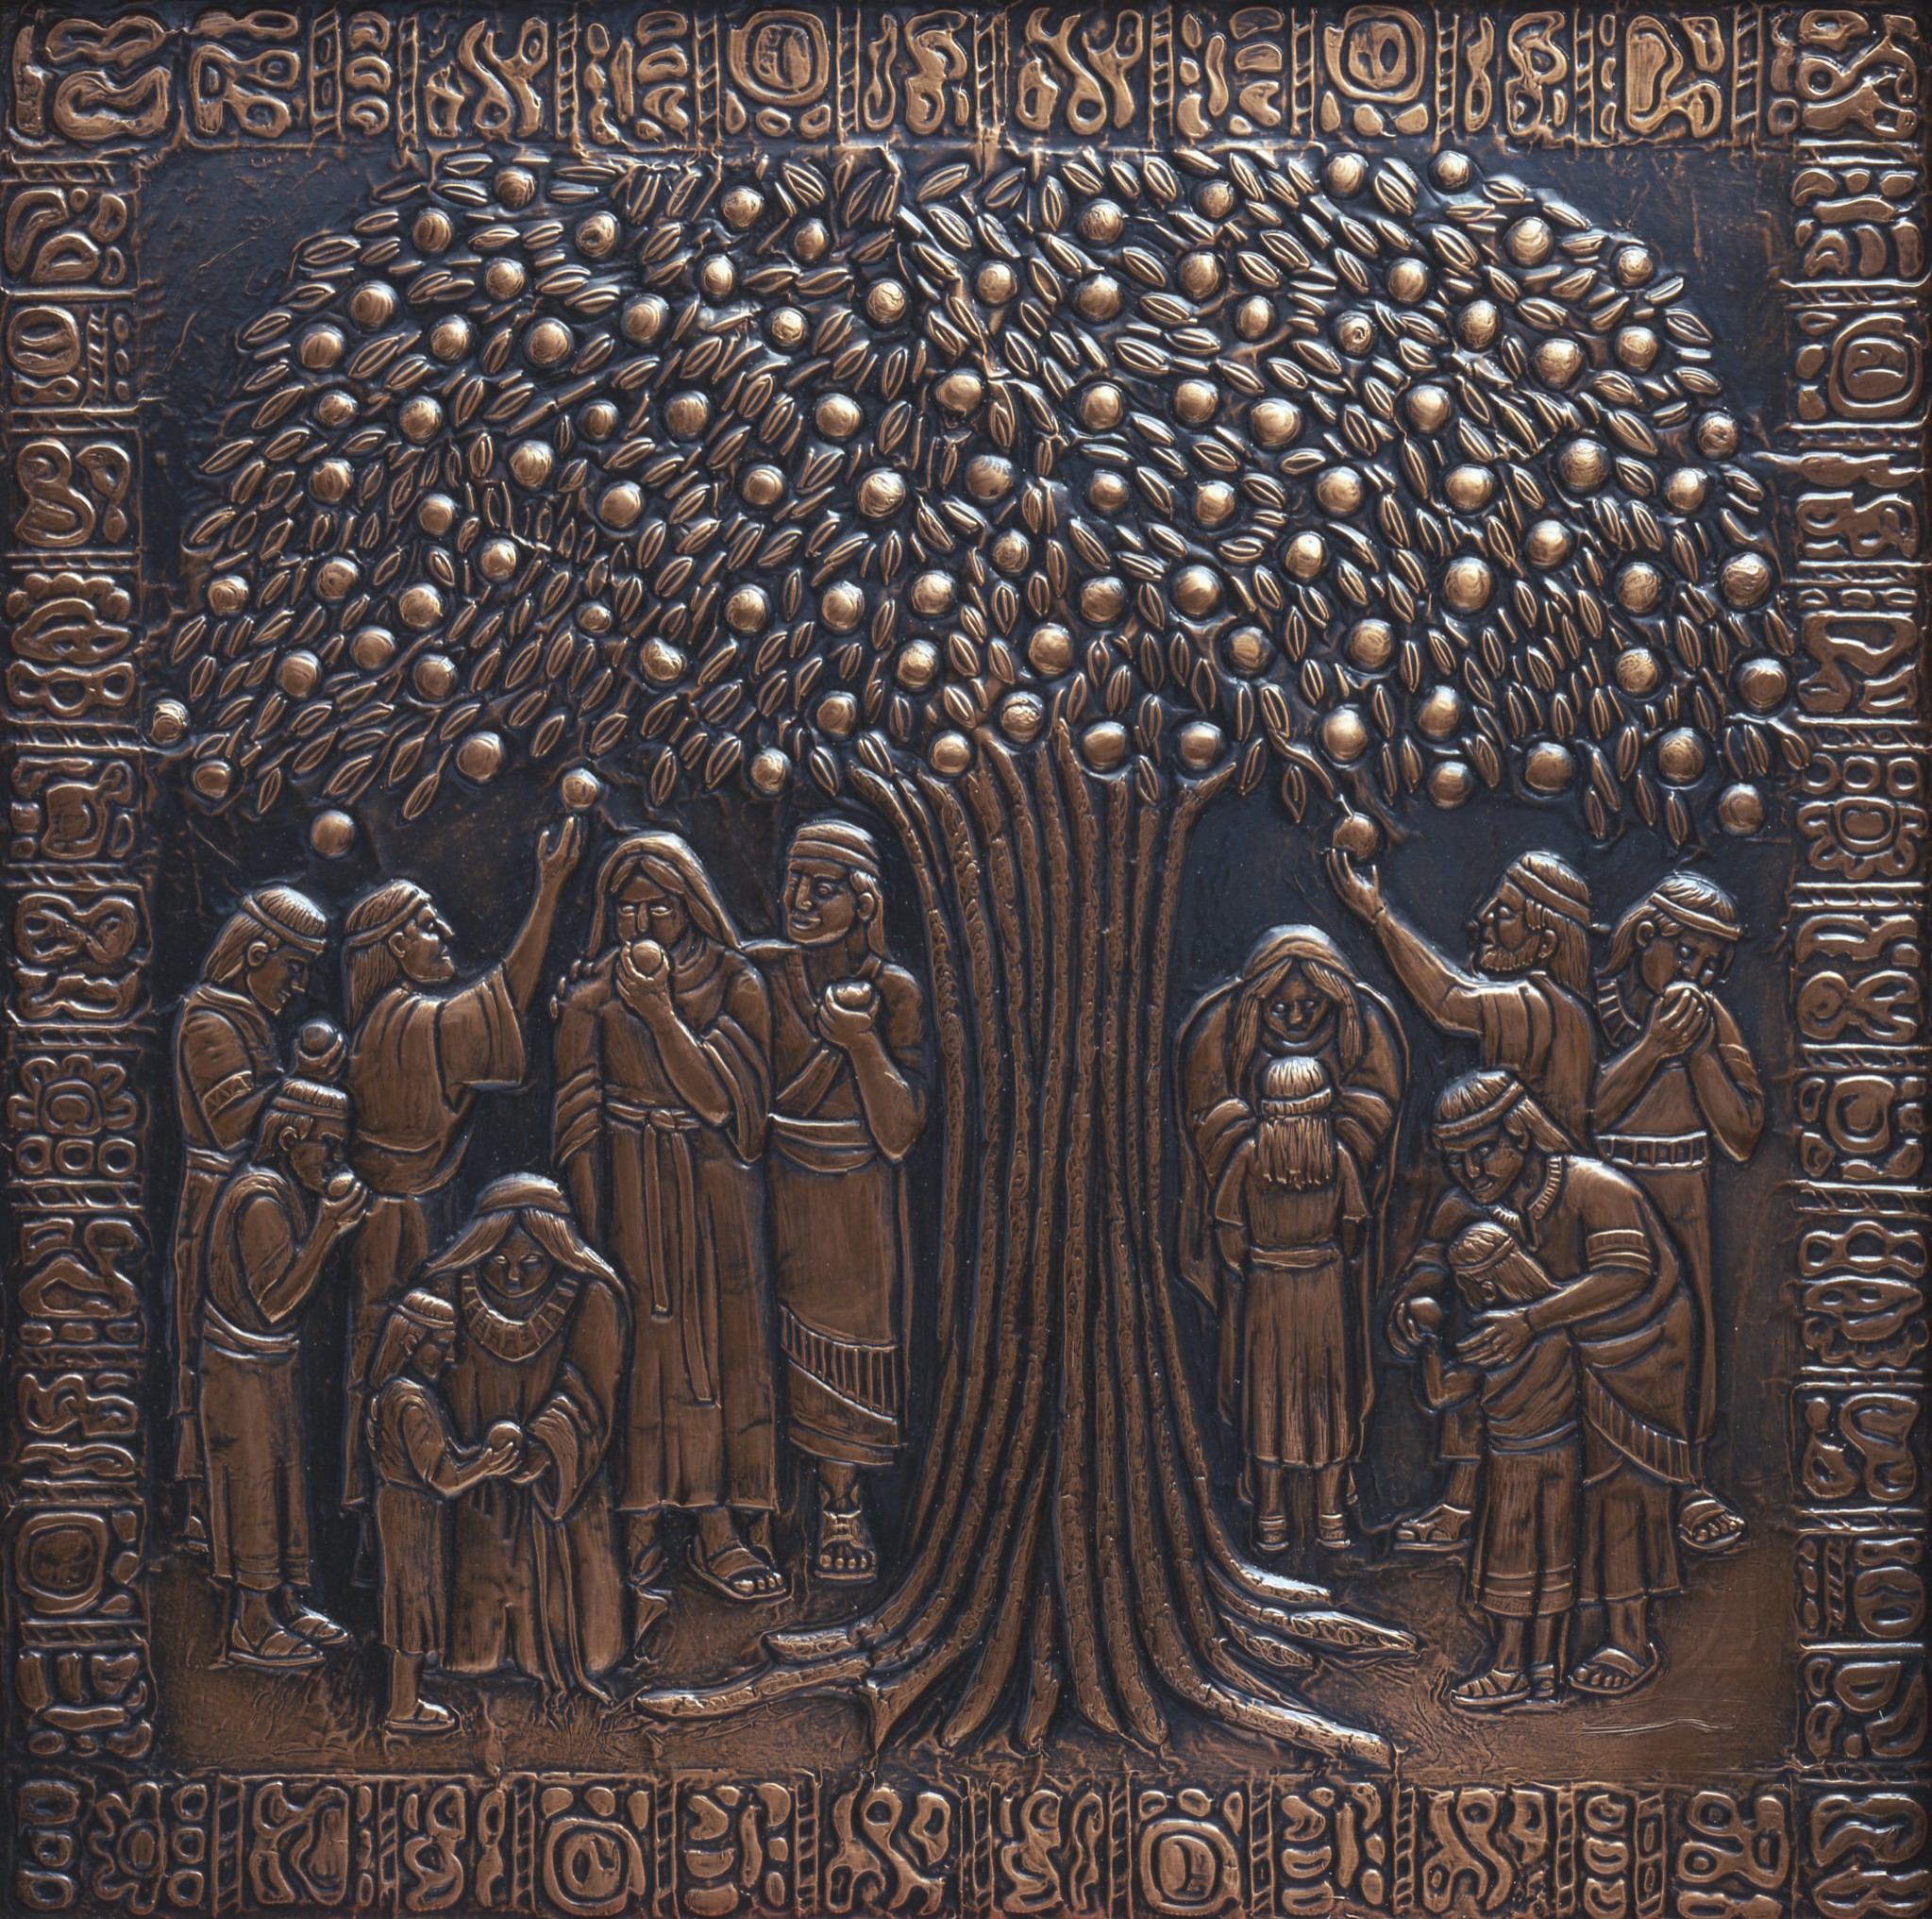 An image in copper depicting 12 people eating the fruit of the tree of life.